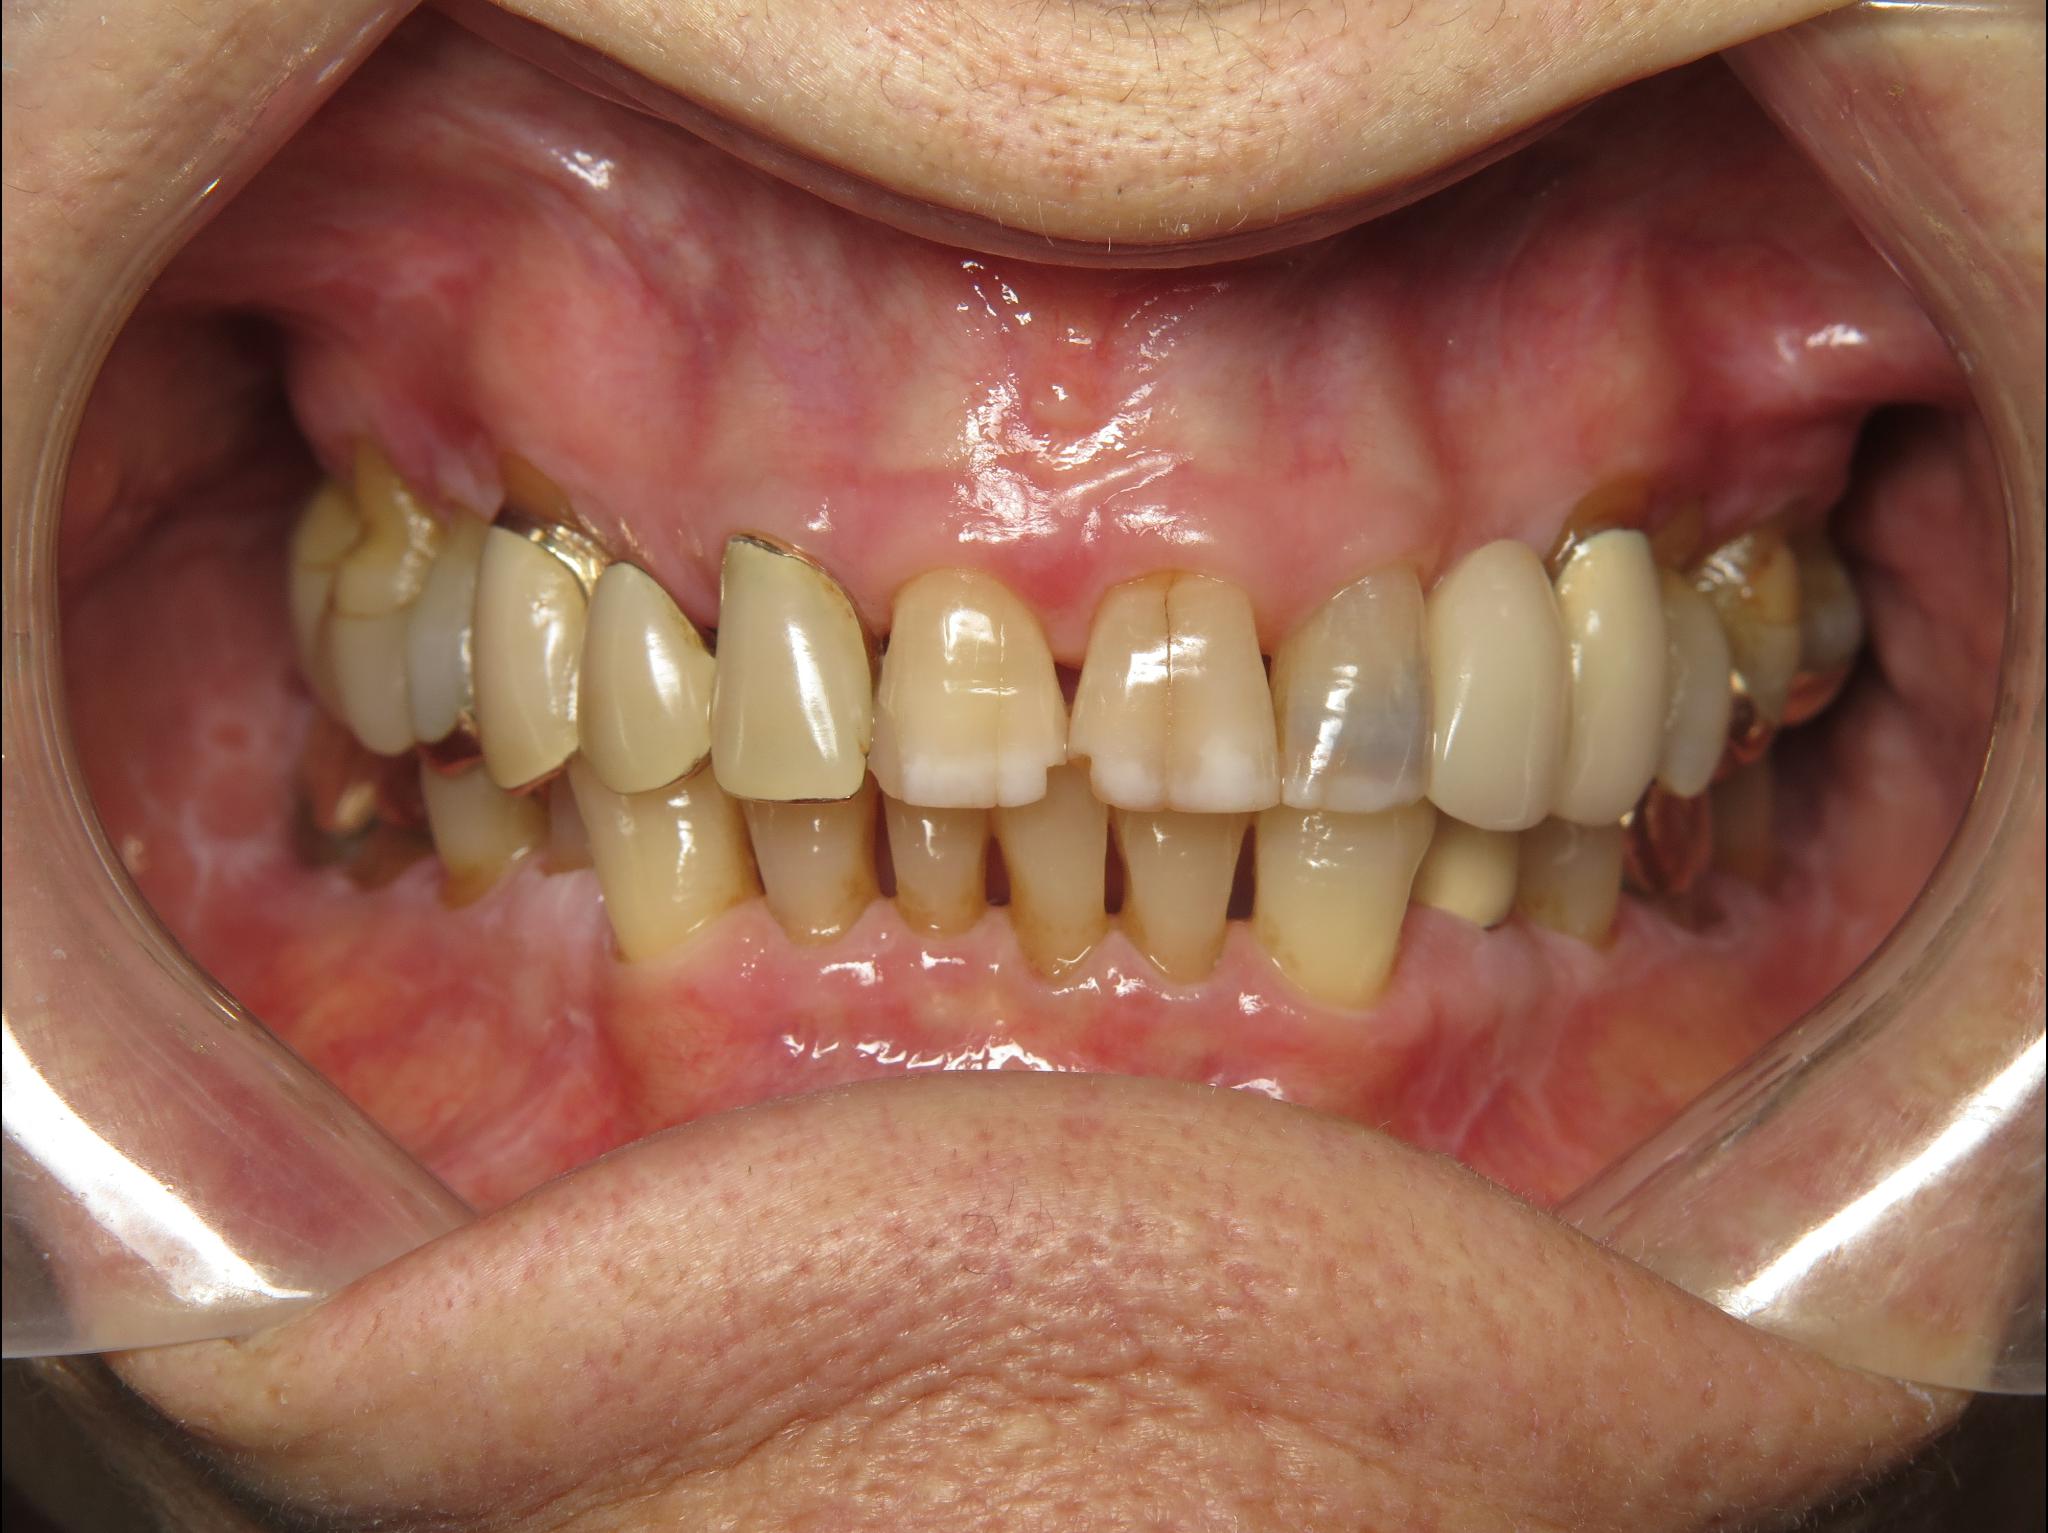 chipped teeth and leaking restorations